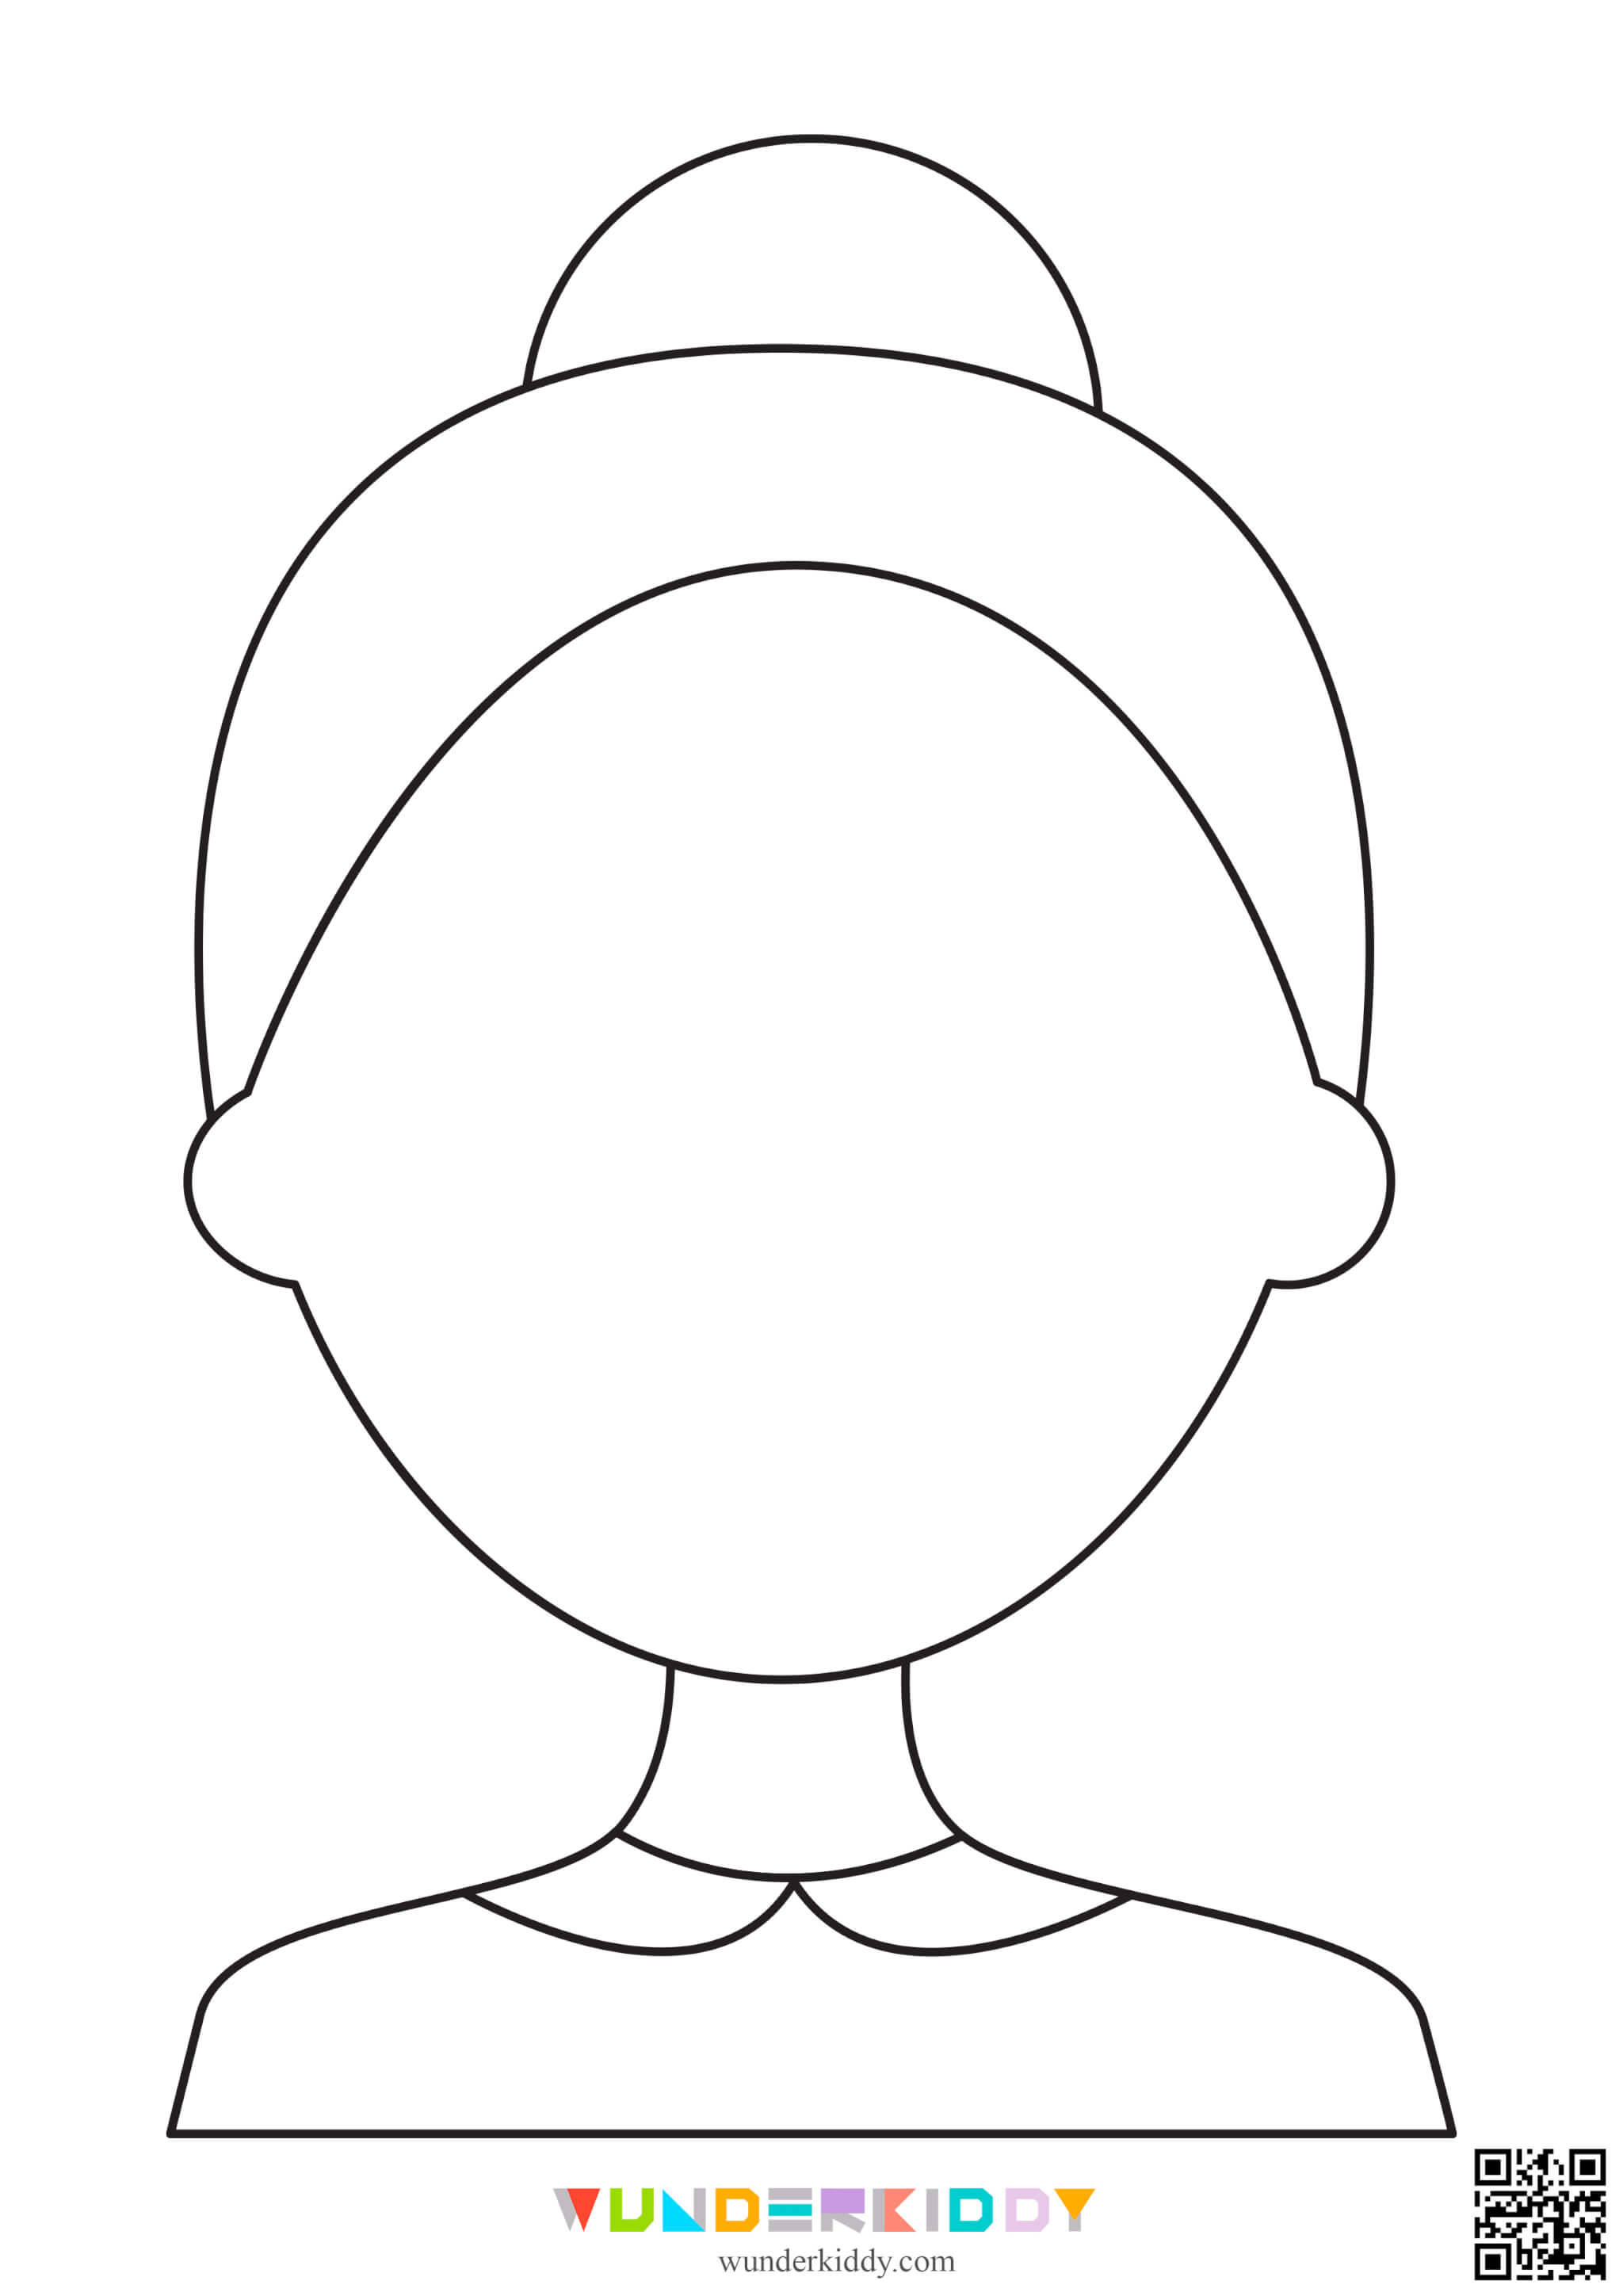 Blank Face Template - Image 4